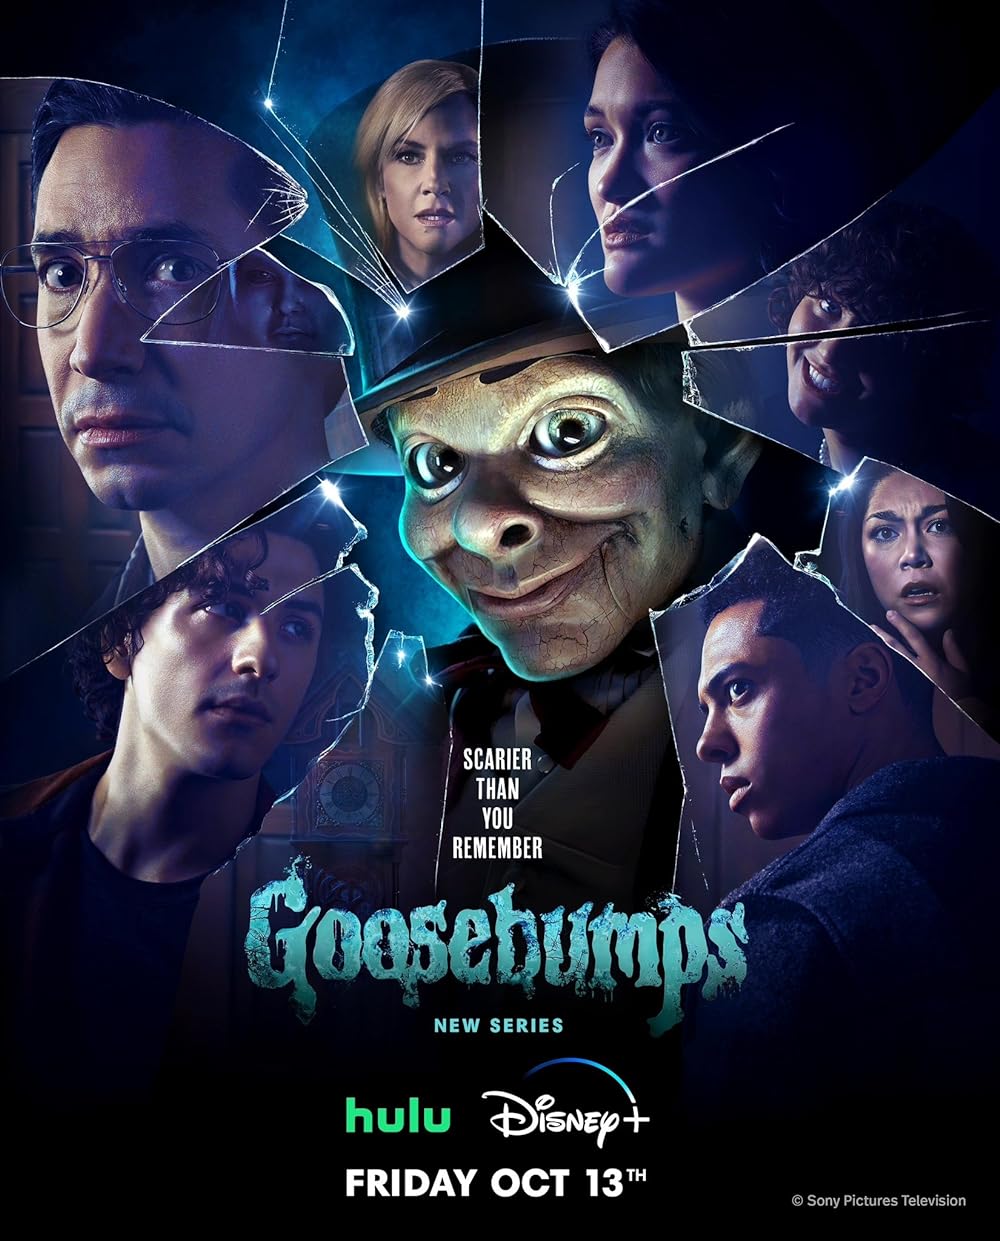 Goosebumps (October 13) - Streaming on Disney+ Hotstar
Goosebumps is a spine-tingling journey inspired by R.L. Stine's iconic book series. Follow a group of high school students as they delve into the enigmatic circumstances surrounding a teenager's mysterious death three decades ago.